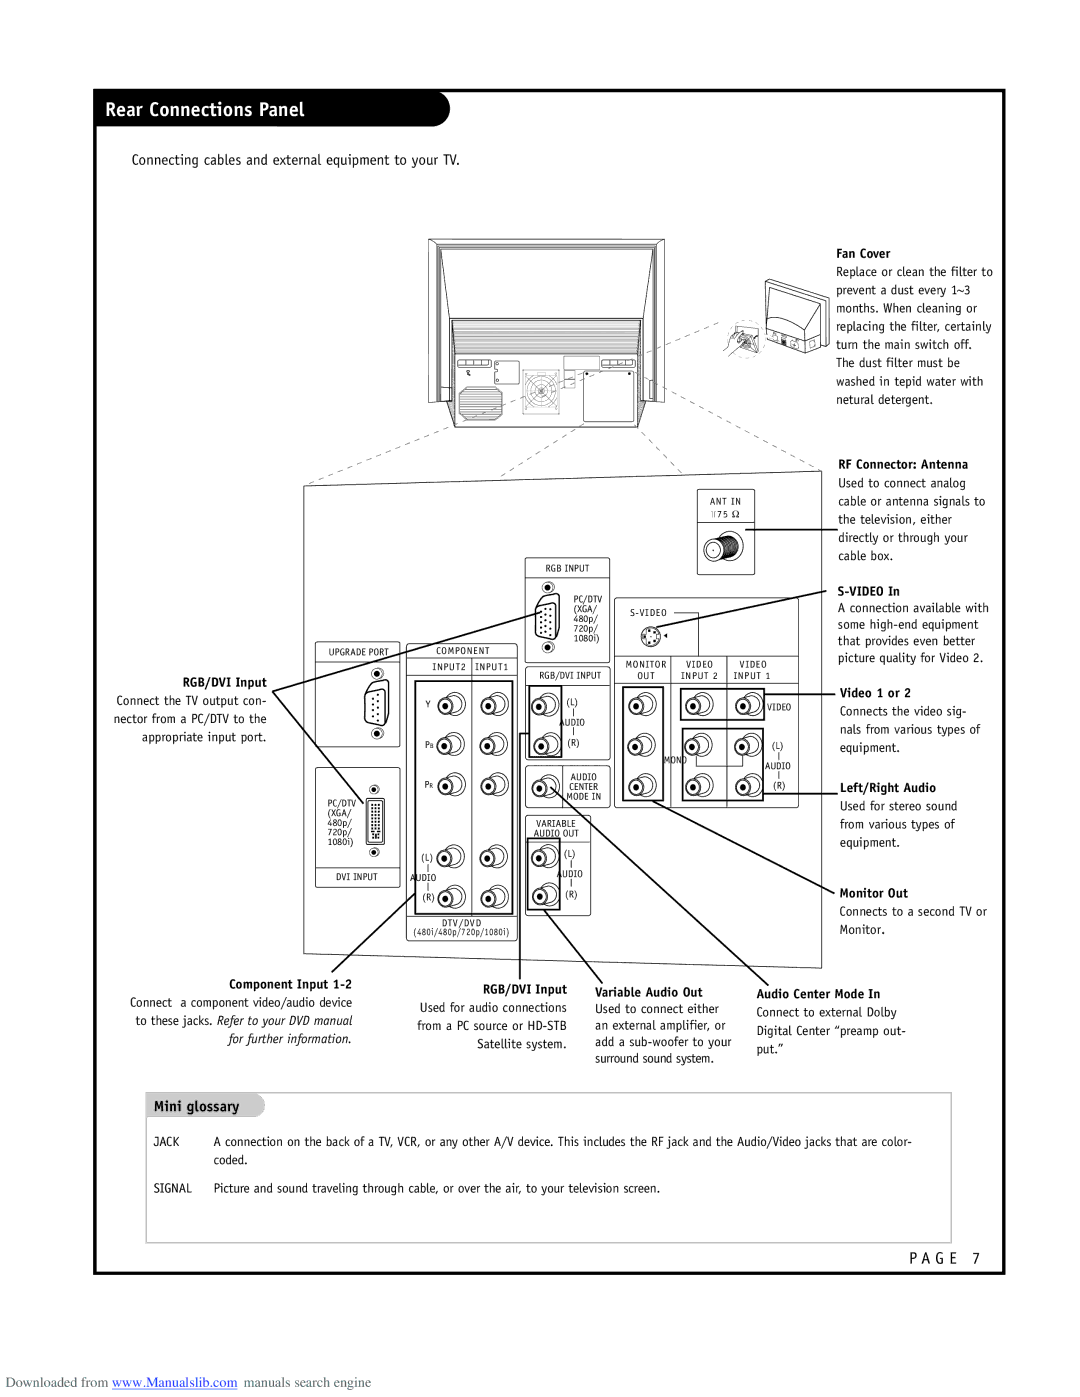 LG Electronics ru-44sz80l owner manual Rear Connections Panel, Connecting cables and external equipment to your TV 